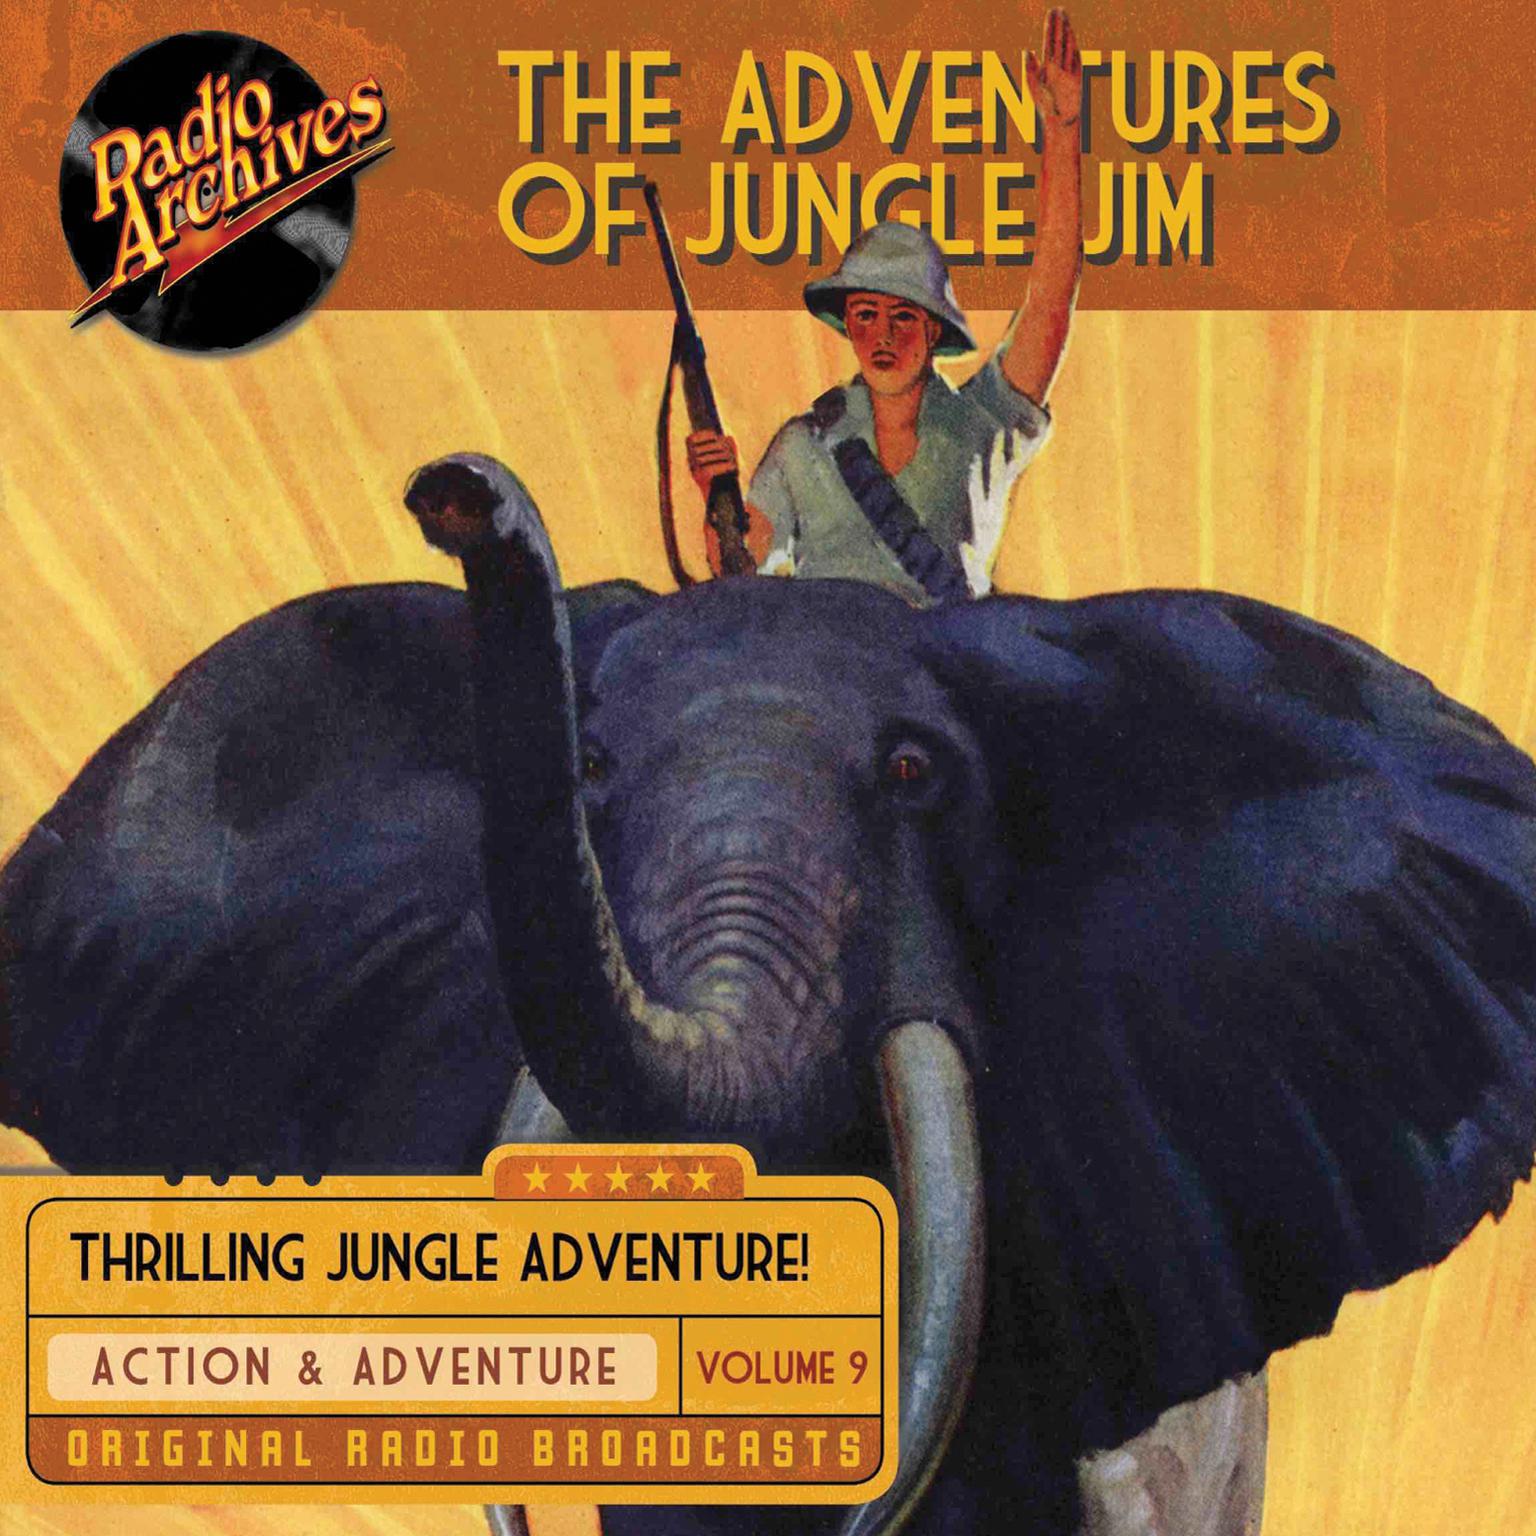 The Adventures of Jungle Jim, Volume 9 Audiobook, by Gene Stafford